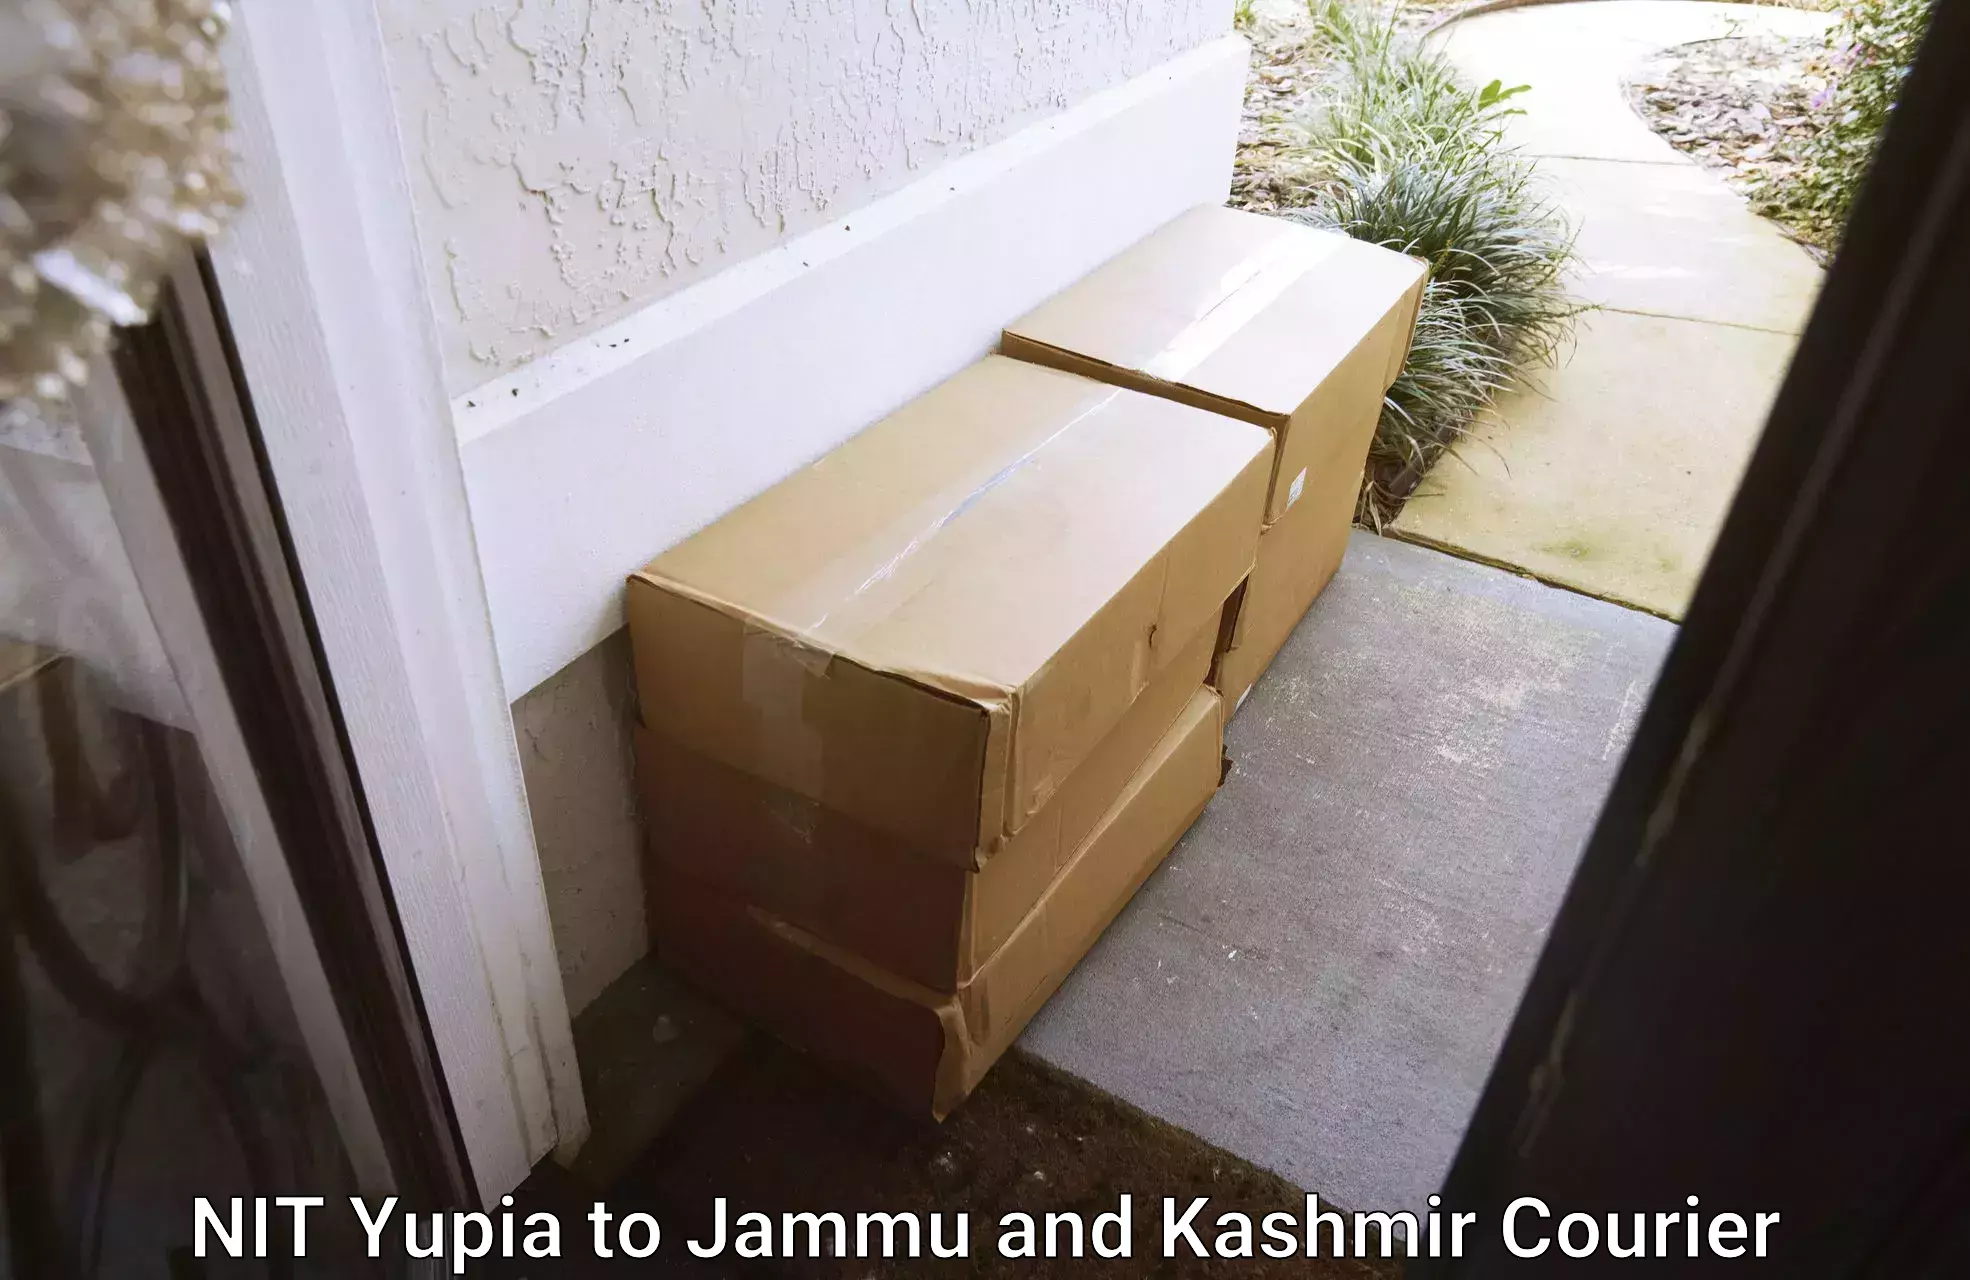 24-hour courier services NIT Yupia to Jammu and Kashmir